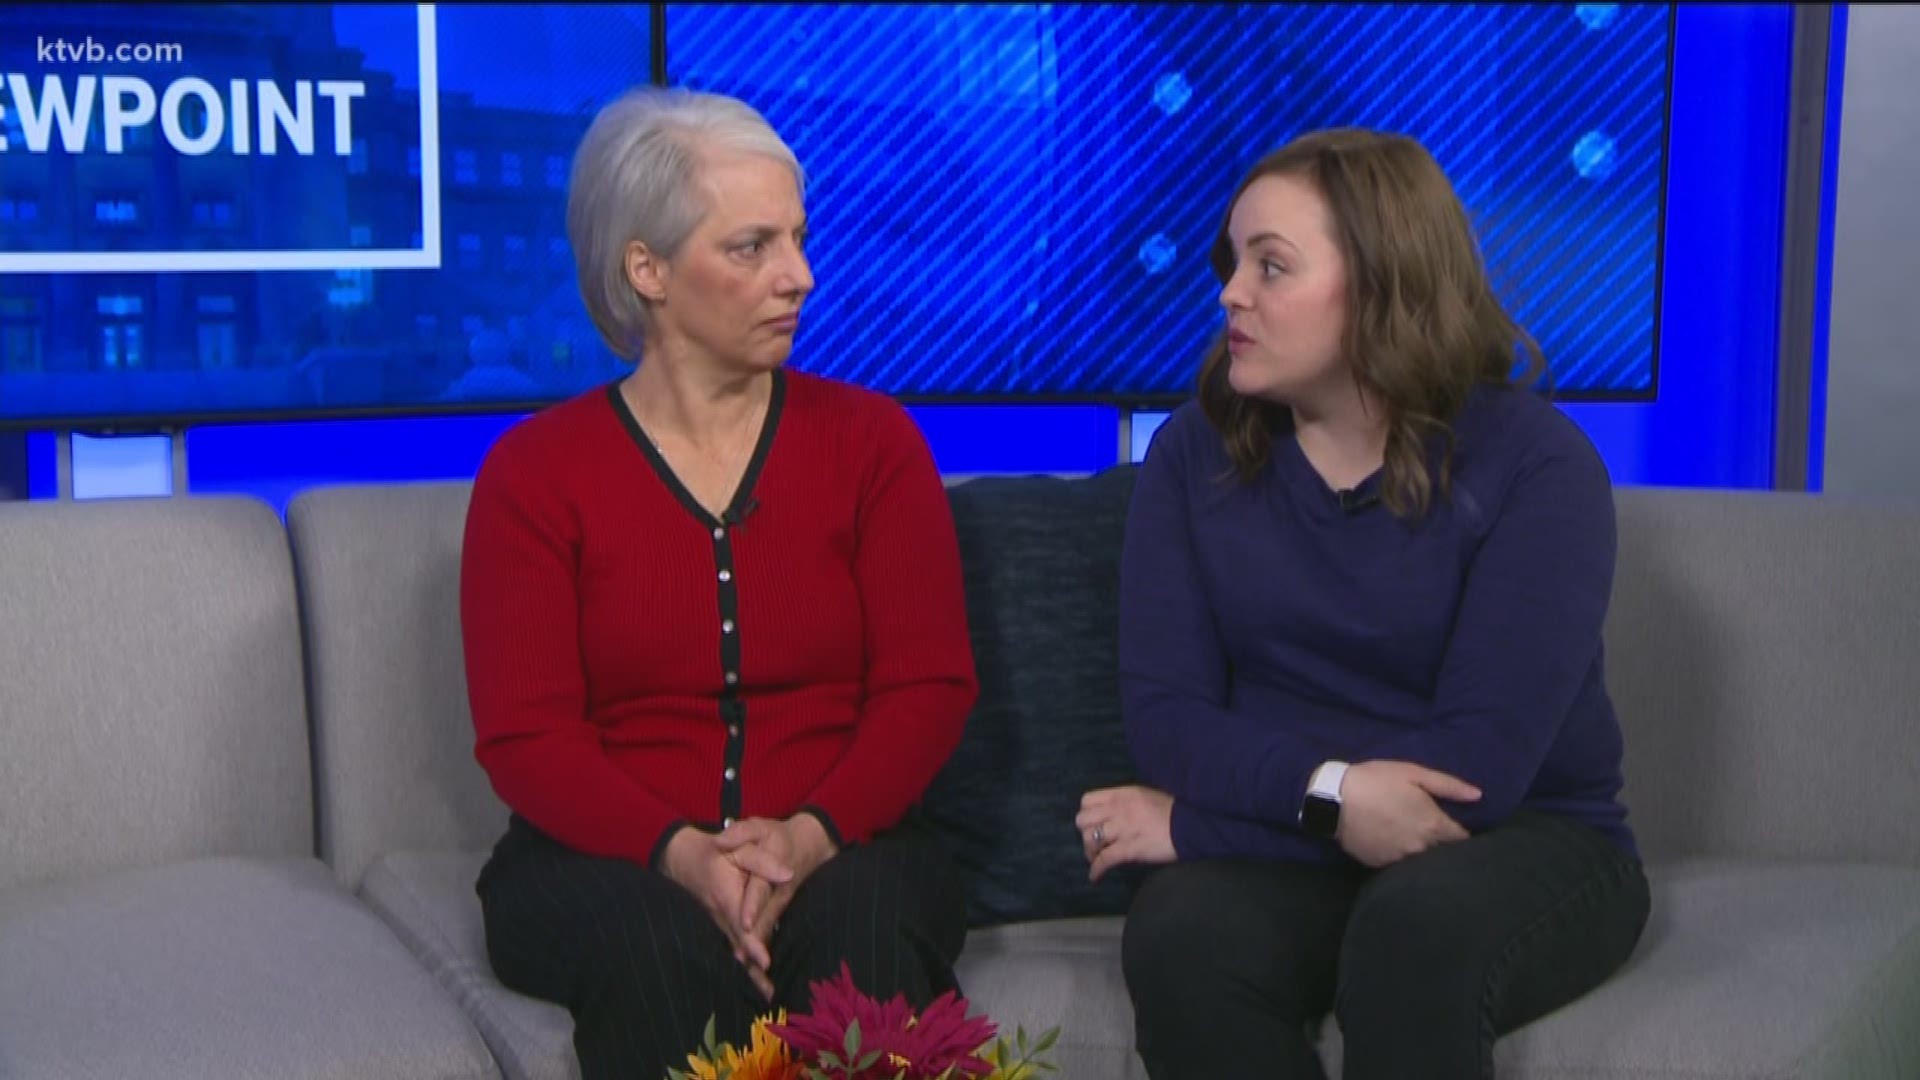 October is National Breast Cancer Awareness Month, and in this Sunday's Viewpoint, hear from two women who are battling Stage 4 breast cancer.